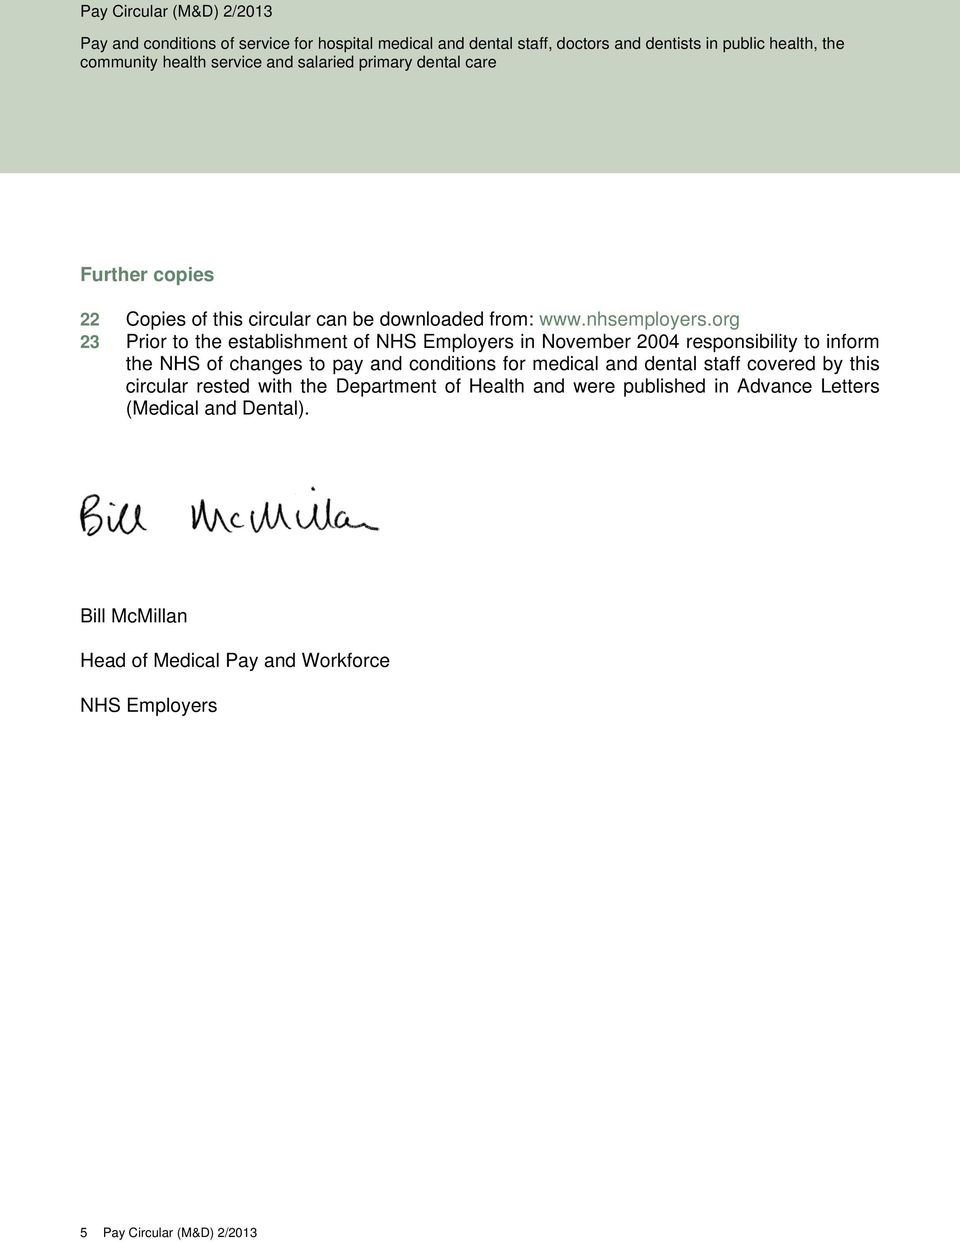 org 23 Prior to the establishment of NHS Employers in November 2004 responsibility to inform the NHS of changes to pay and conditions for medical and dental staff